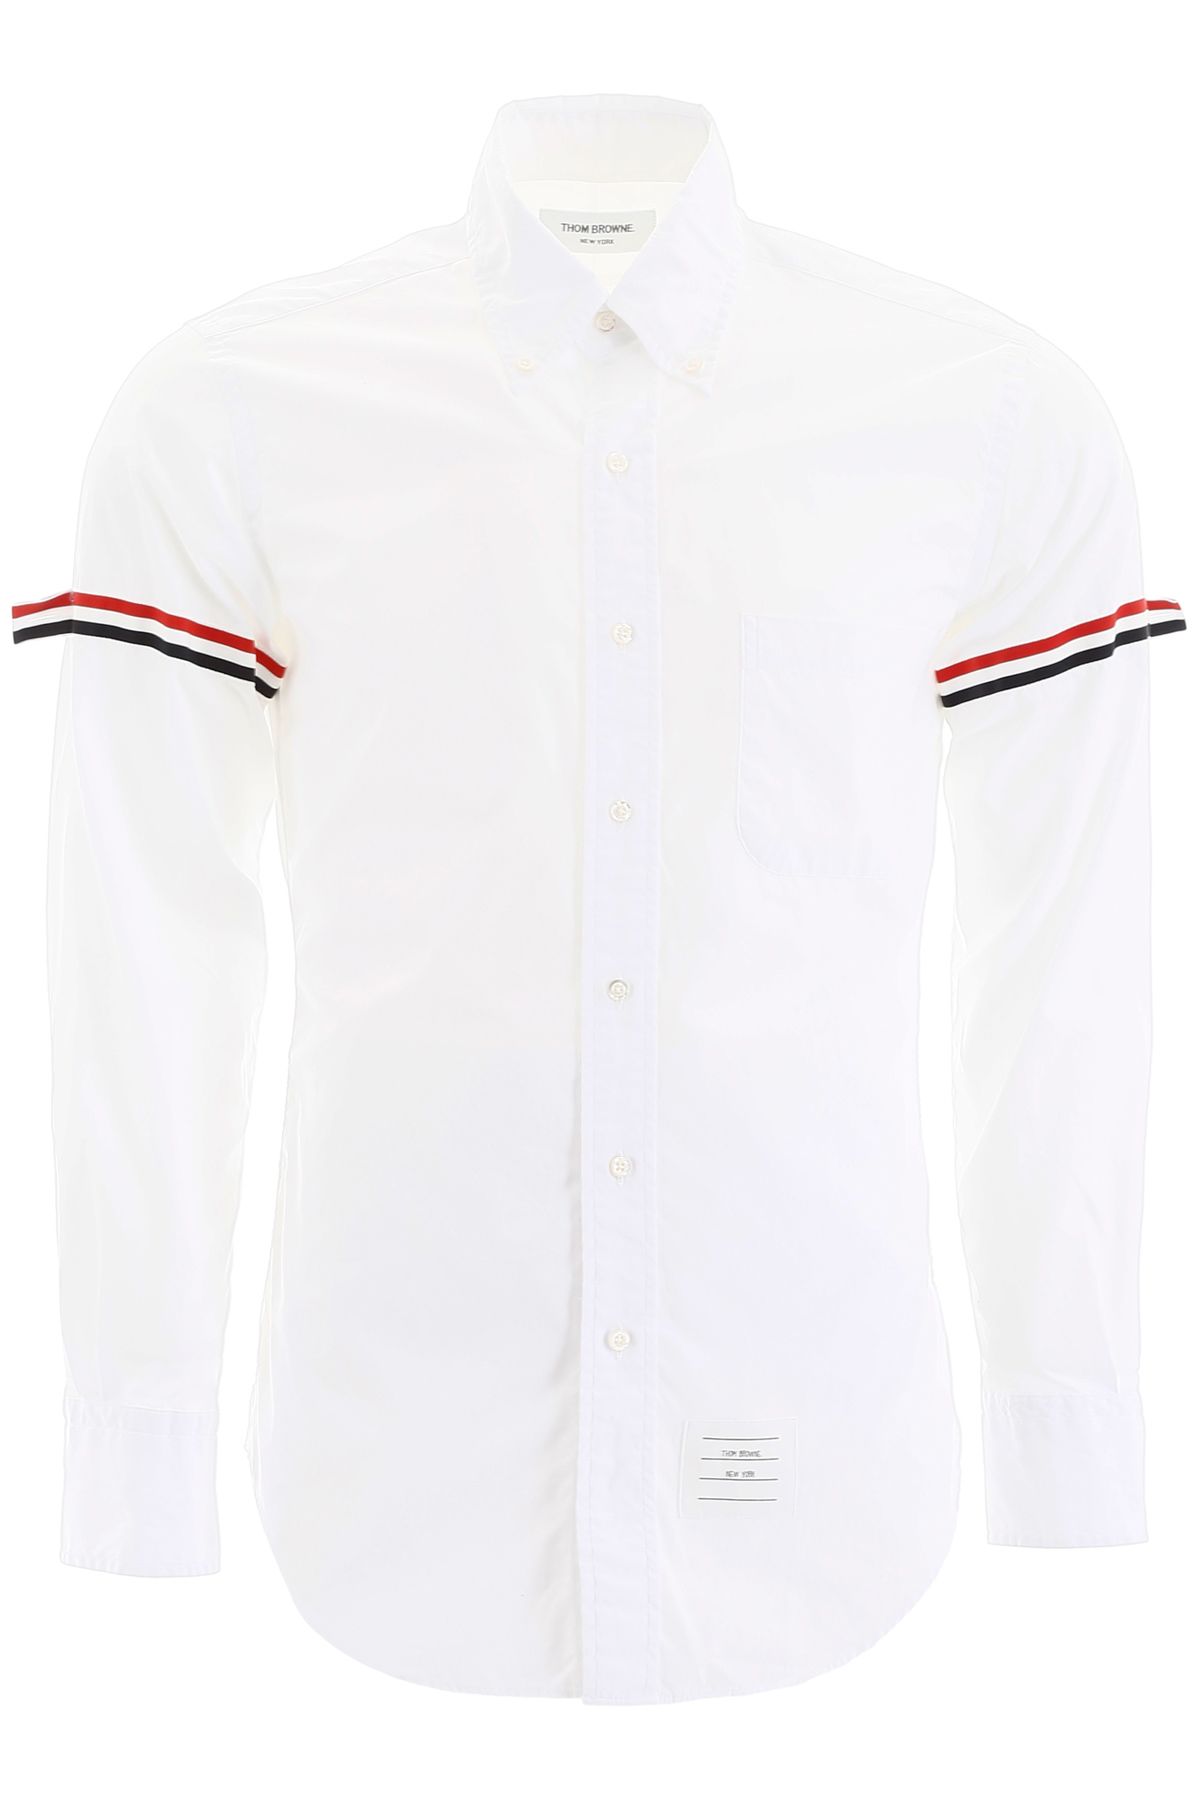 Thom Browne Shirt With Tricolor Bands | ModeSens